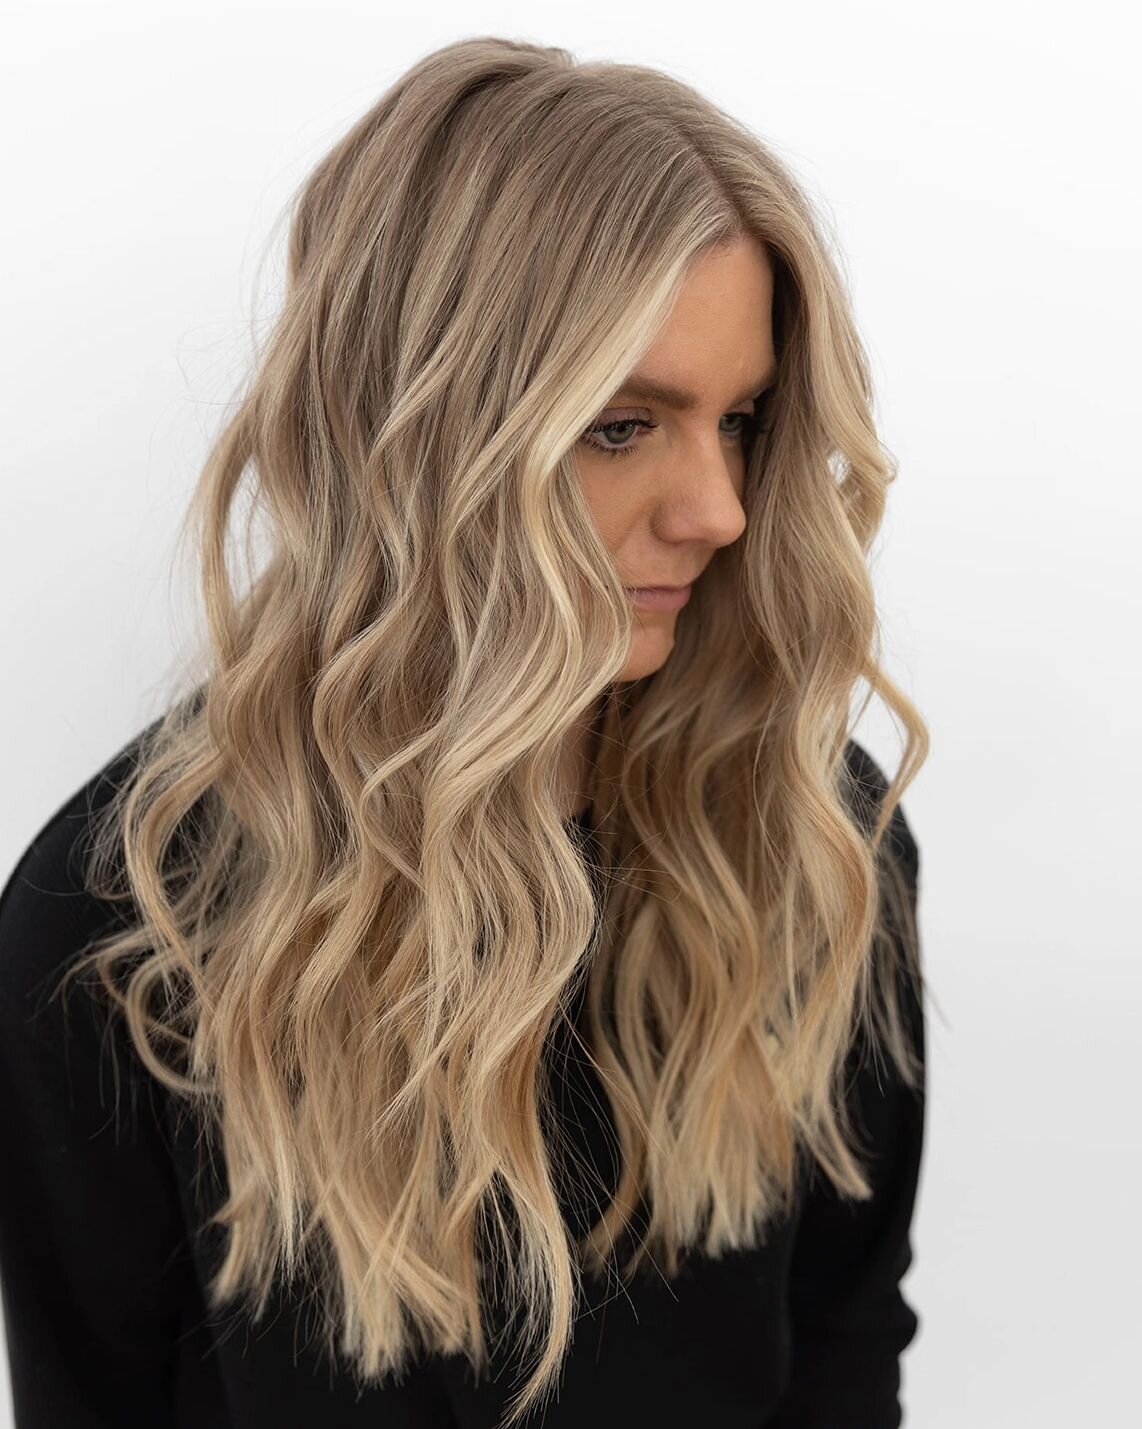 Bronde babe ✨️ One of the most low maintenance &amp; low commitment ways to go a little darker while still being able to easily lighten it again in the future when you're ready. We did lowlights &amp; a tone &amp; those lowlights blend so good with h